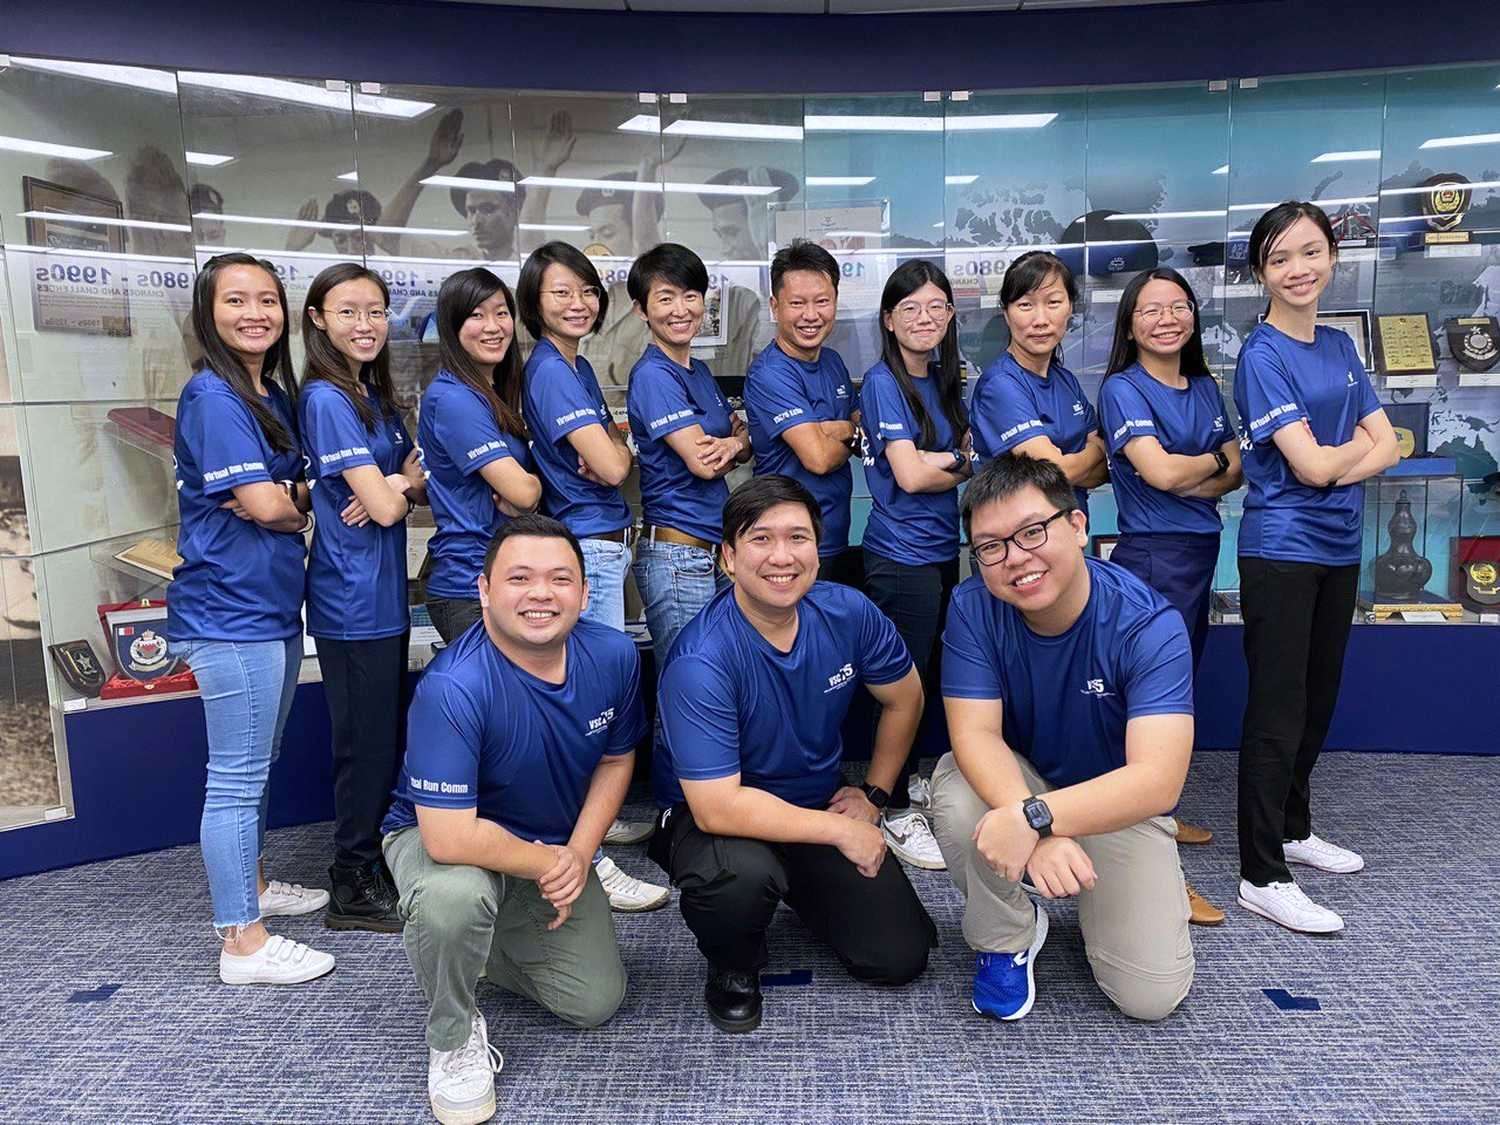 a team of officers wearing blue polo tee posing together with the men kneeing infront and the women at the back row posing with their arms crossed